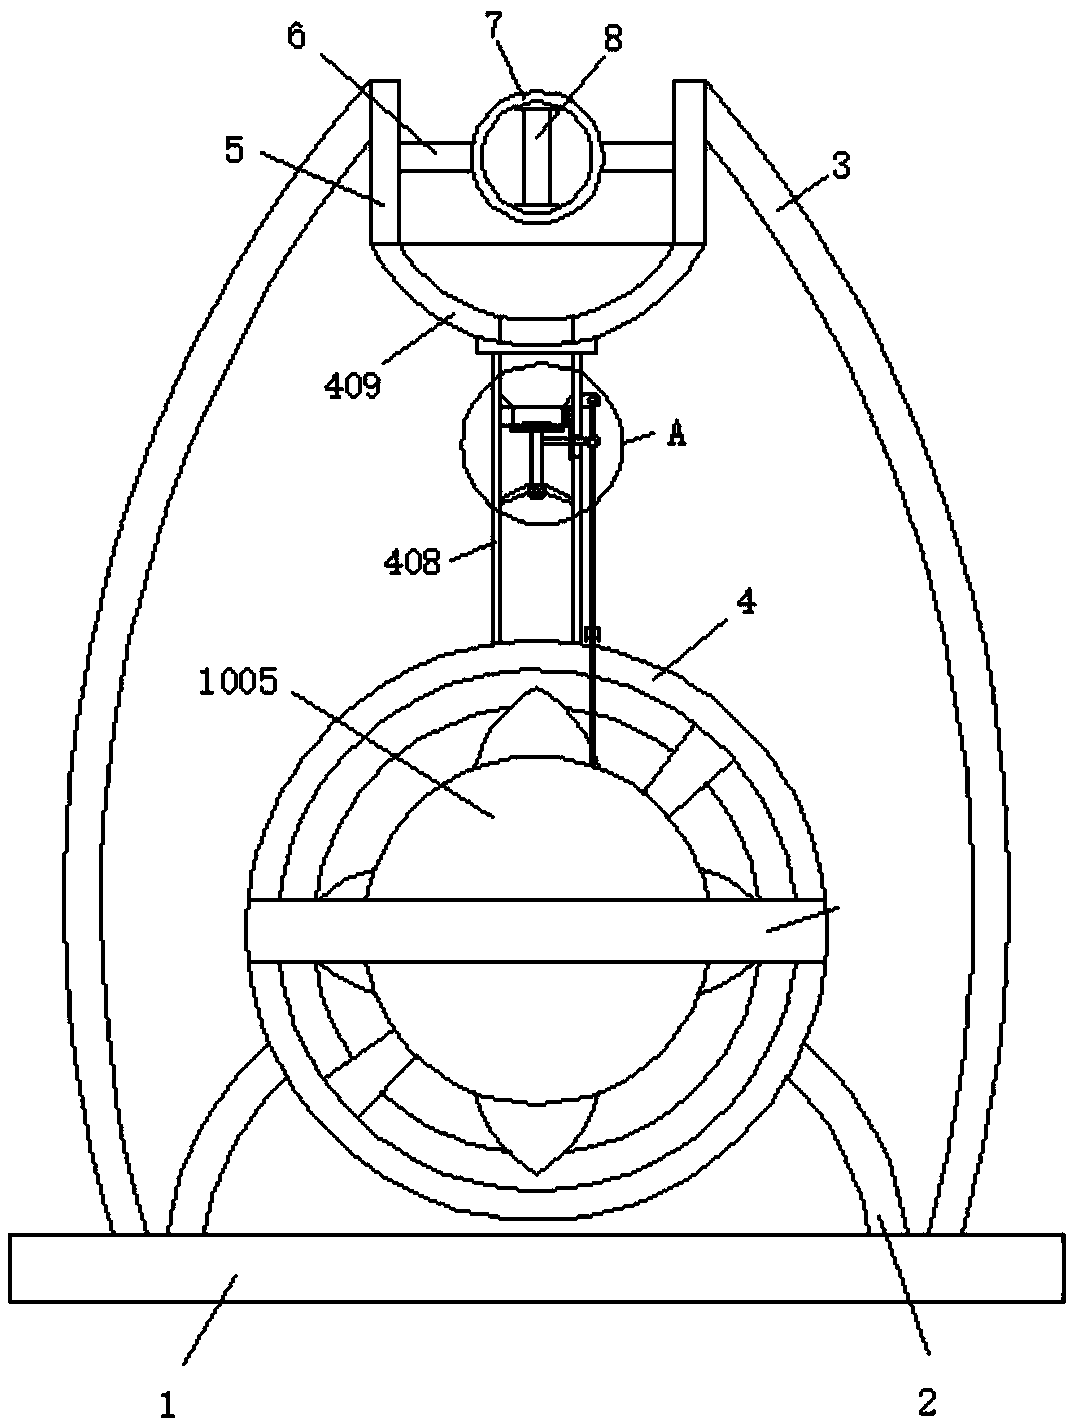 Device for quickly treating pests by changes in air pressure and vibration of objects